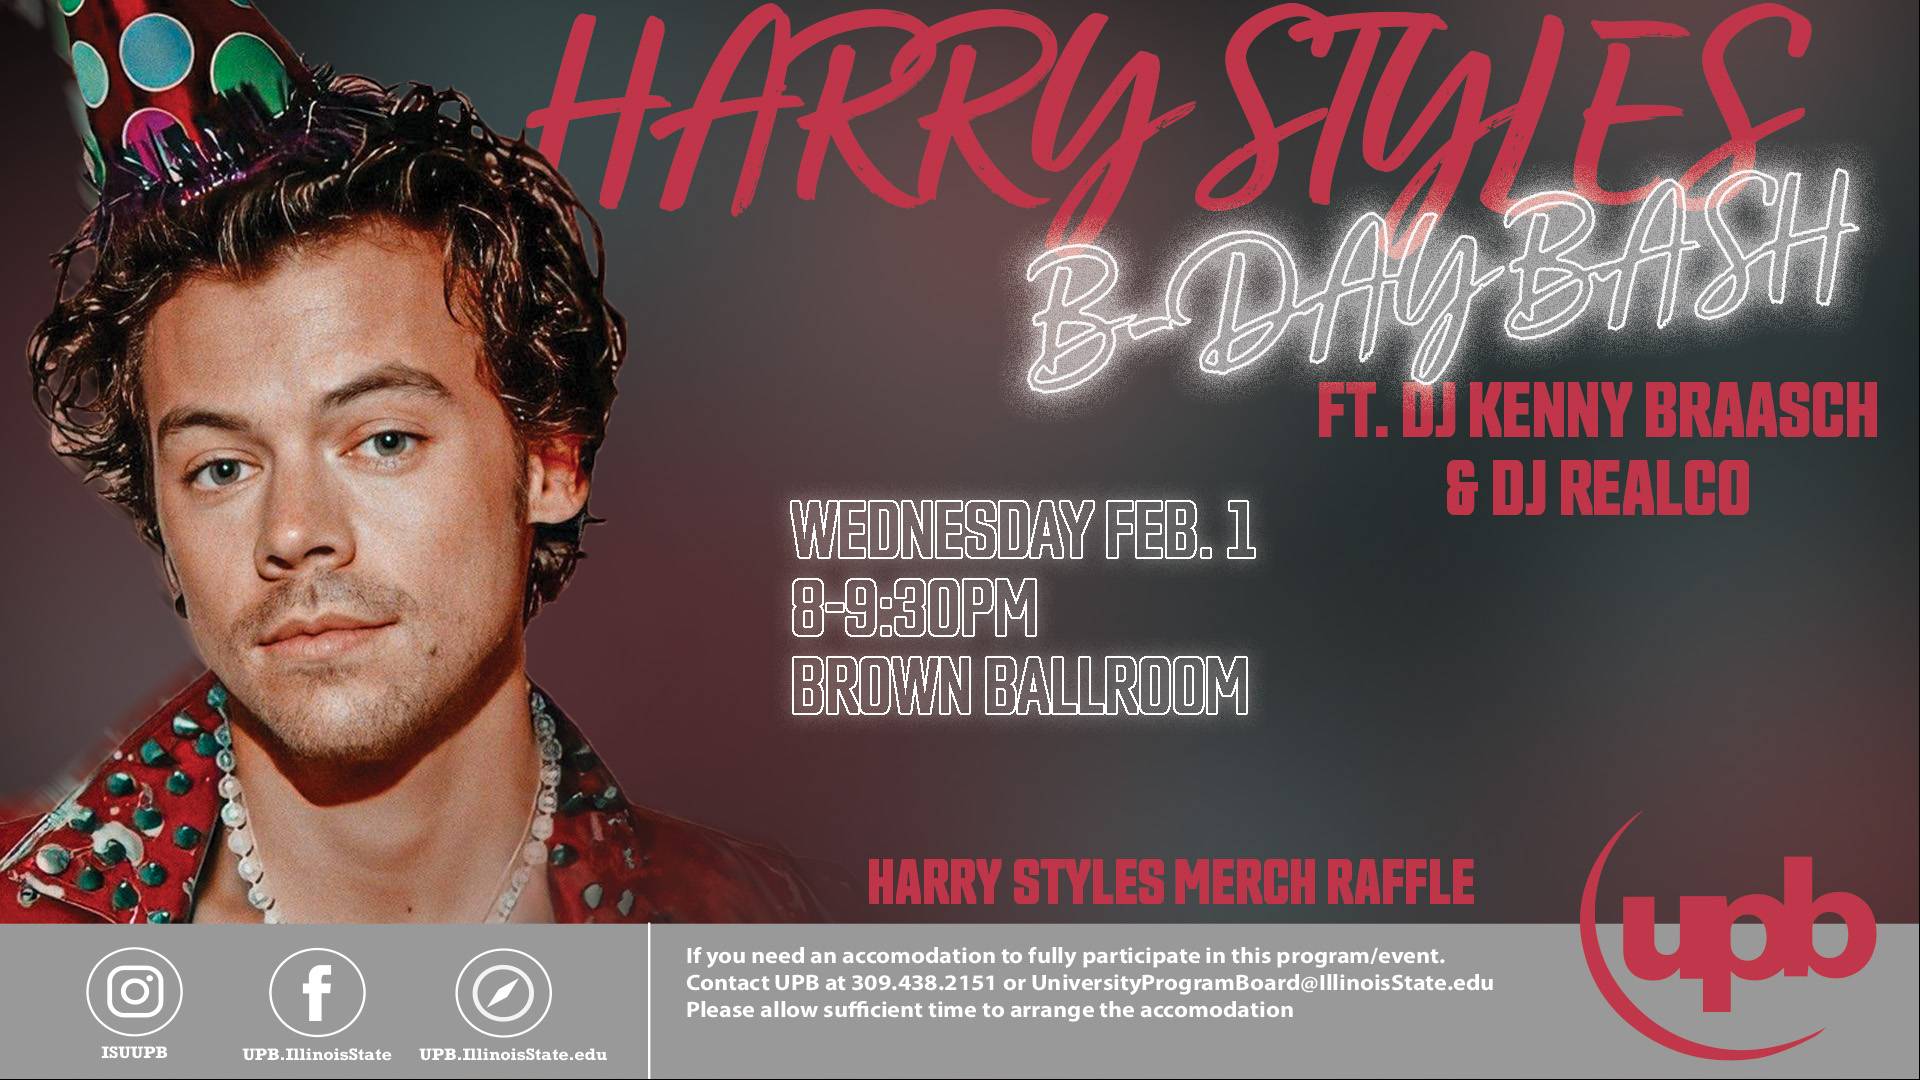 Graphic with picture of Harry Styles. Harry Styles B-Day Bash ft. DJ Kenny Braasch and DJ Real Co. Wednesday Feb. 1 8-9:30pm Brown Ballroom